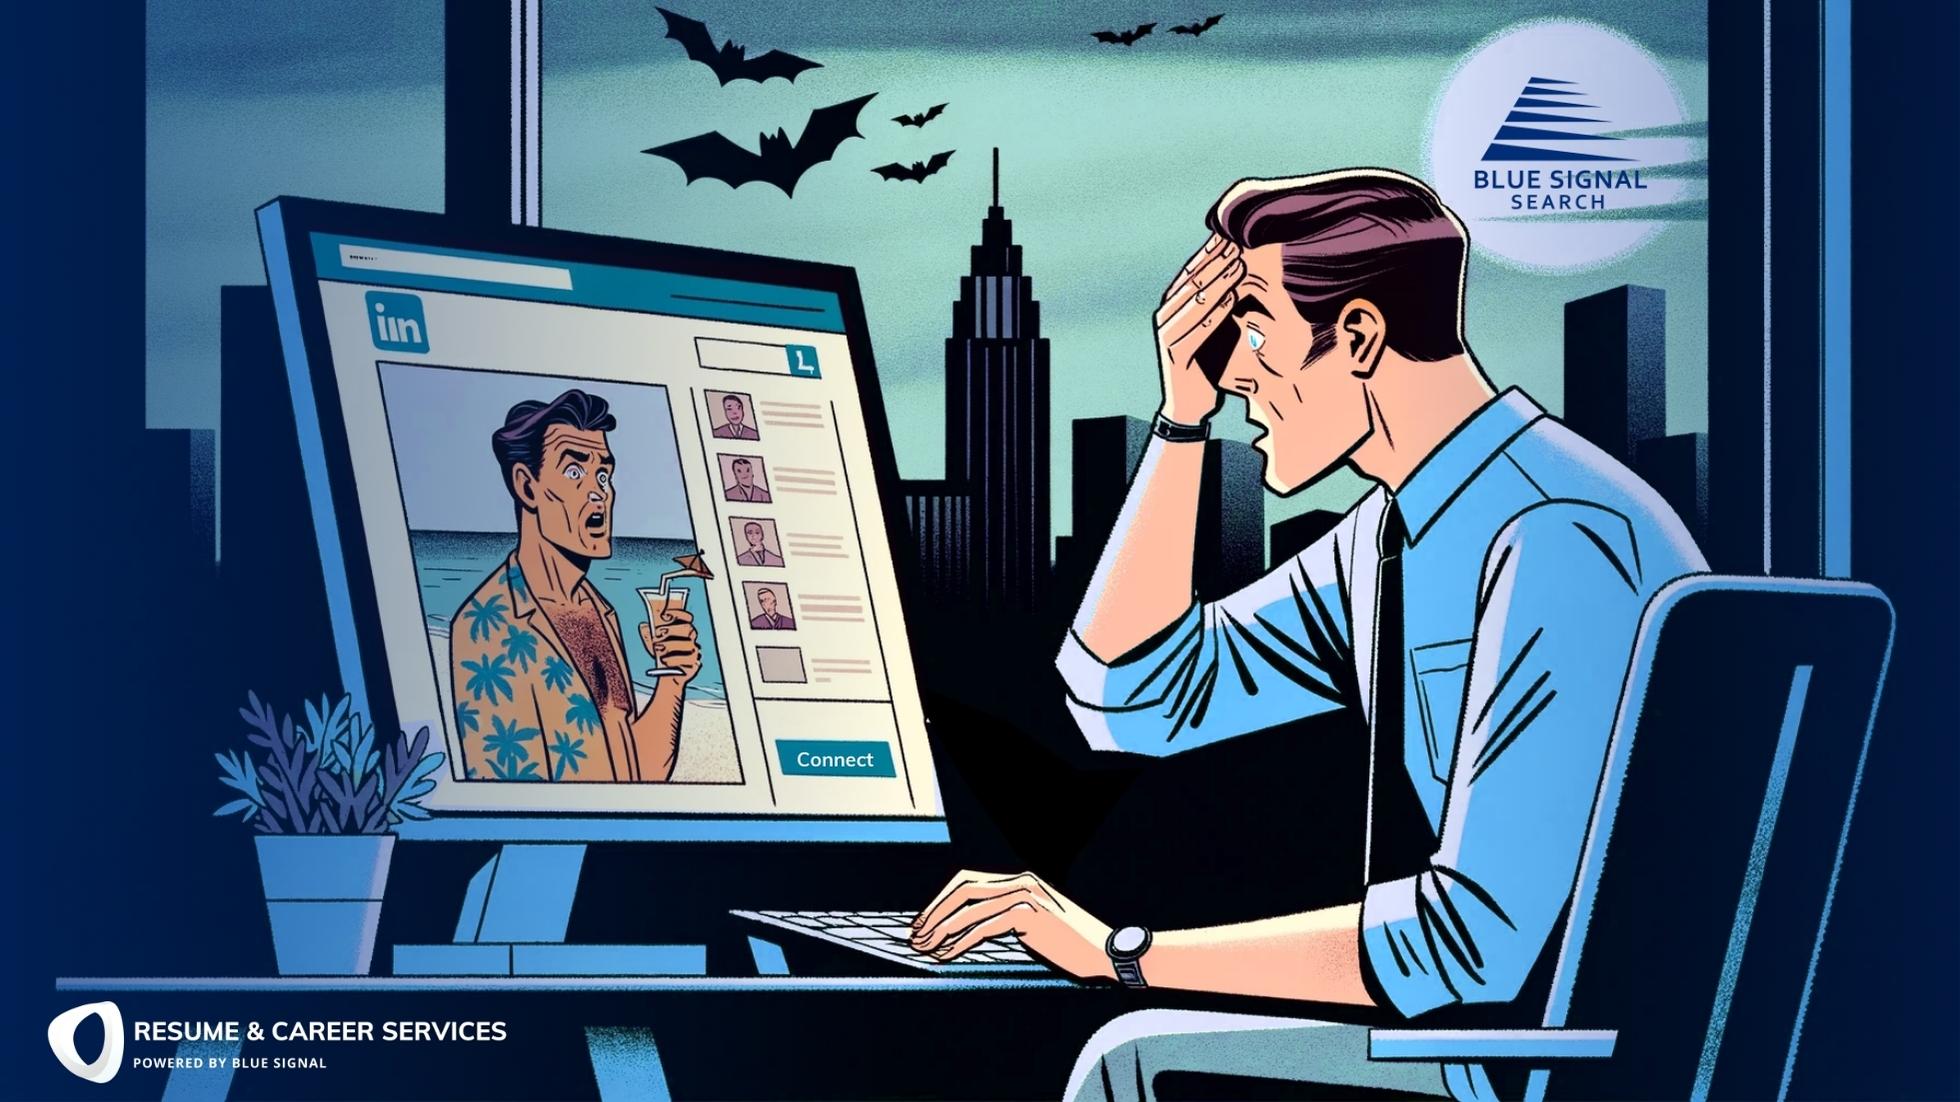 Blue Signal Recruiter looks shocked at his screen as he sees a candidate LinkedIn profile with a picture of him drinking a cocktail on the beach in his swim trunks for his profile picture.